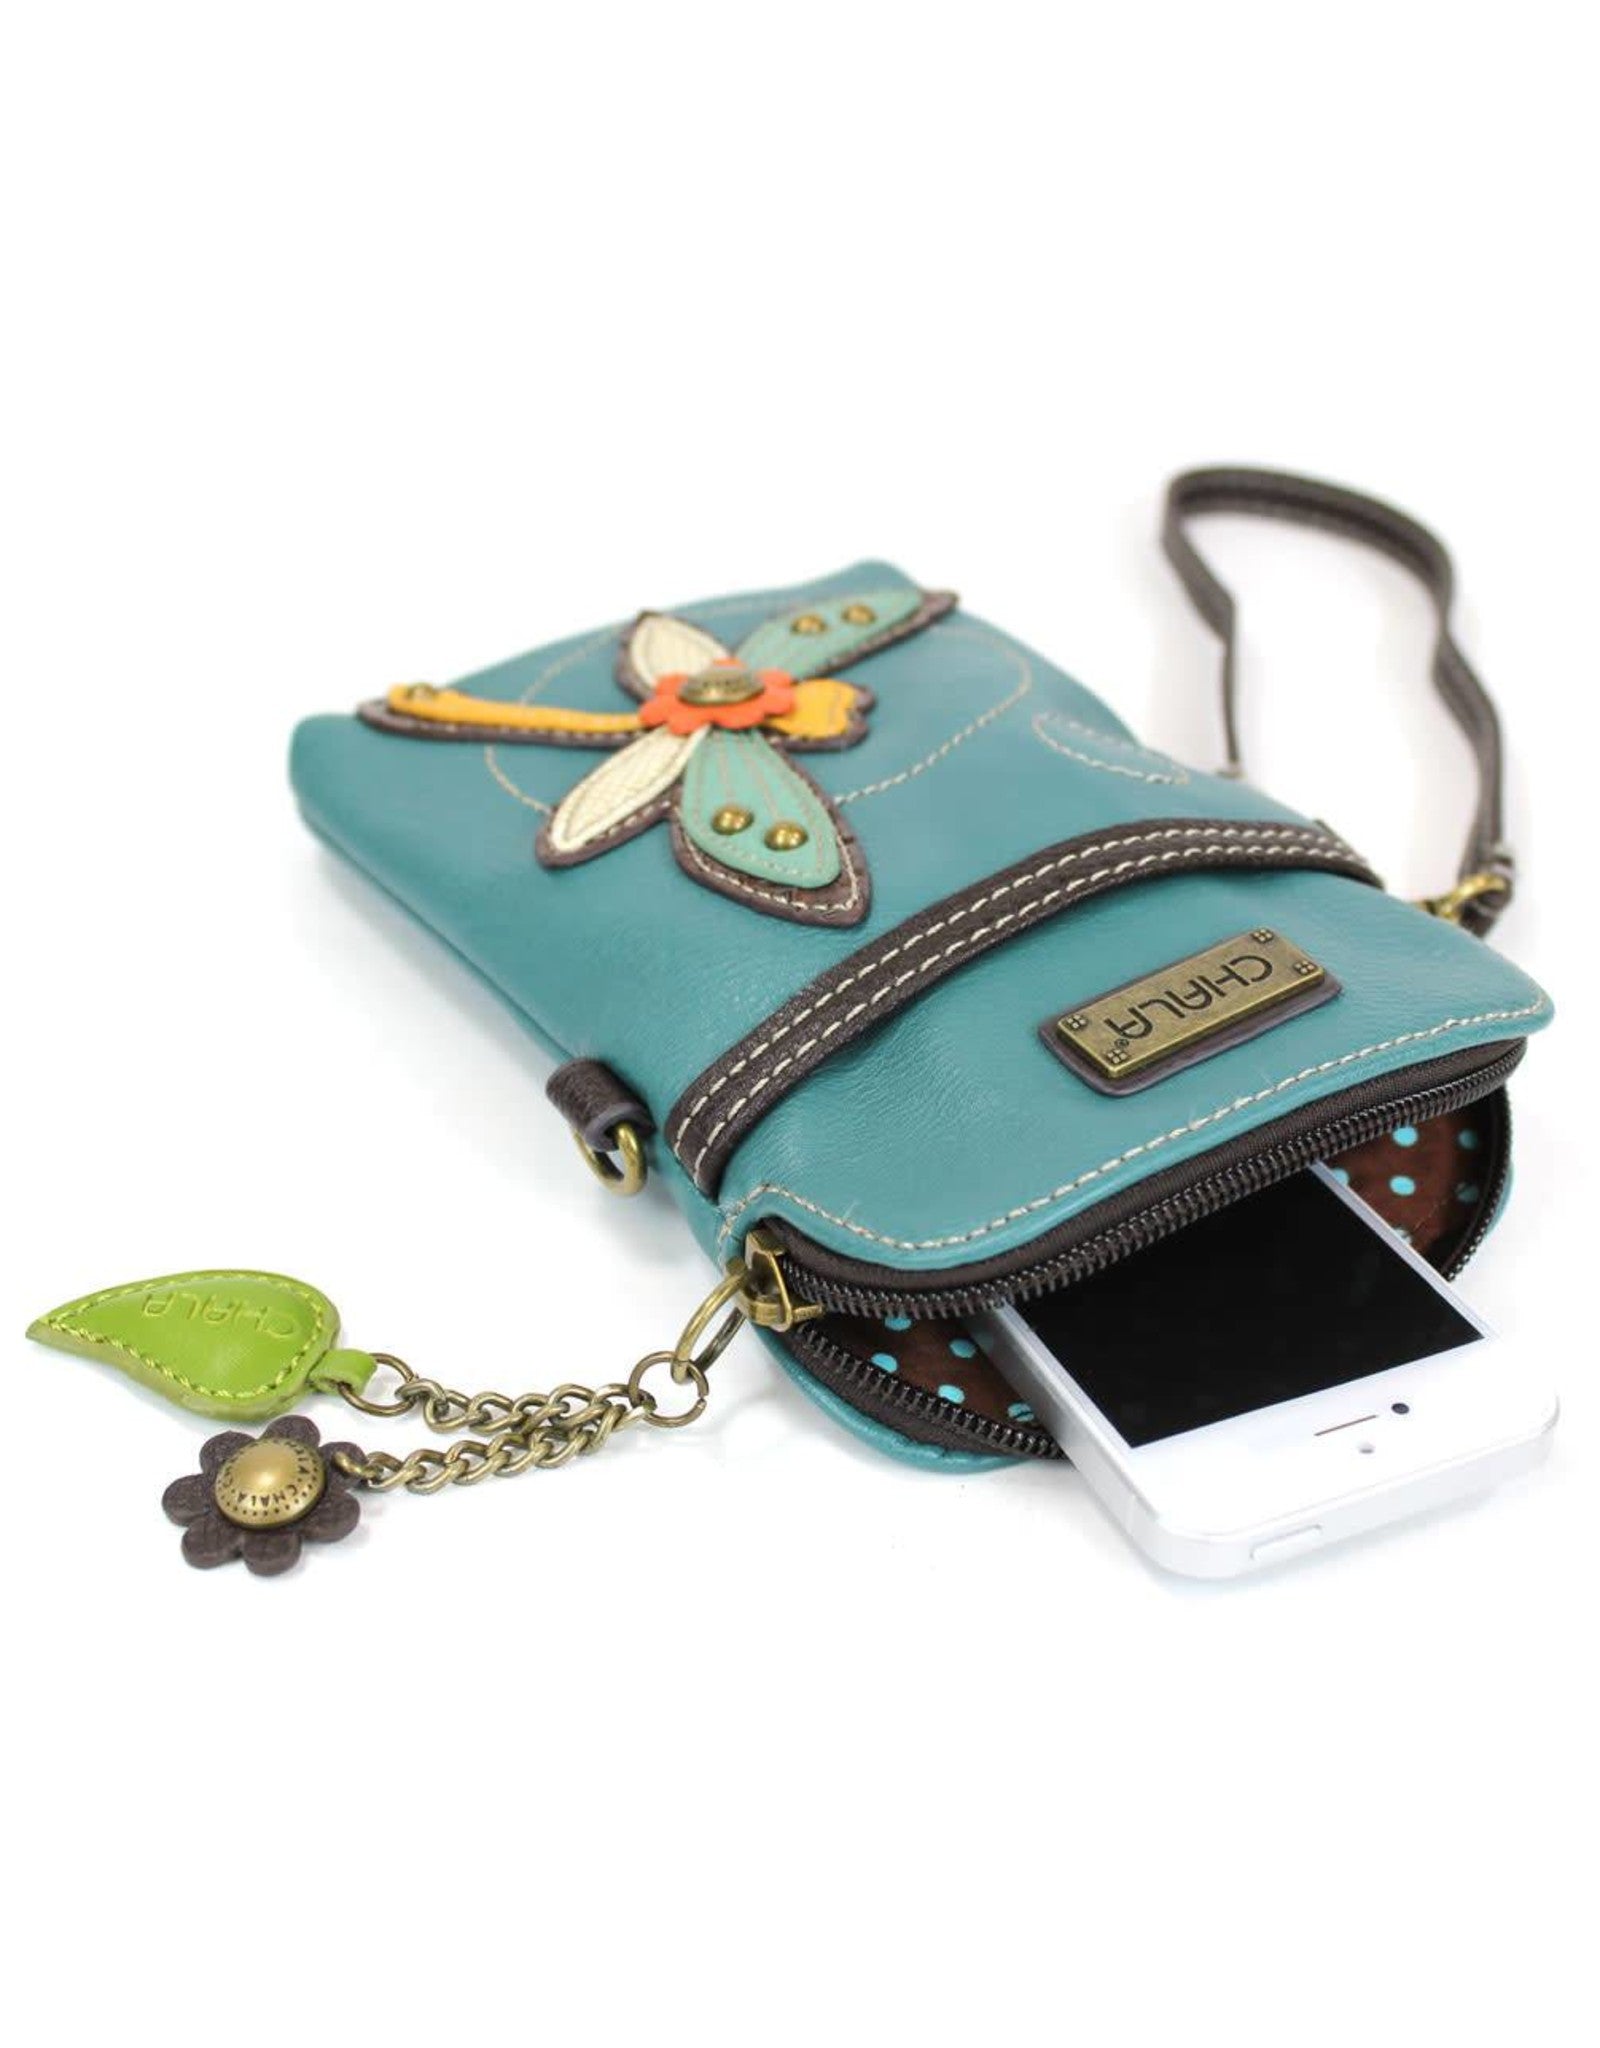 Dragonfly Cellphone Crossbody - Turquoise